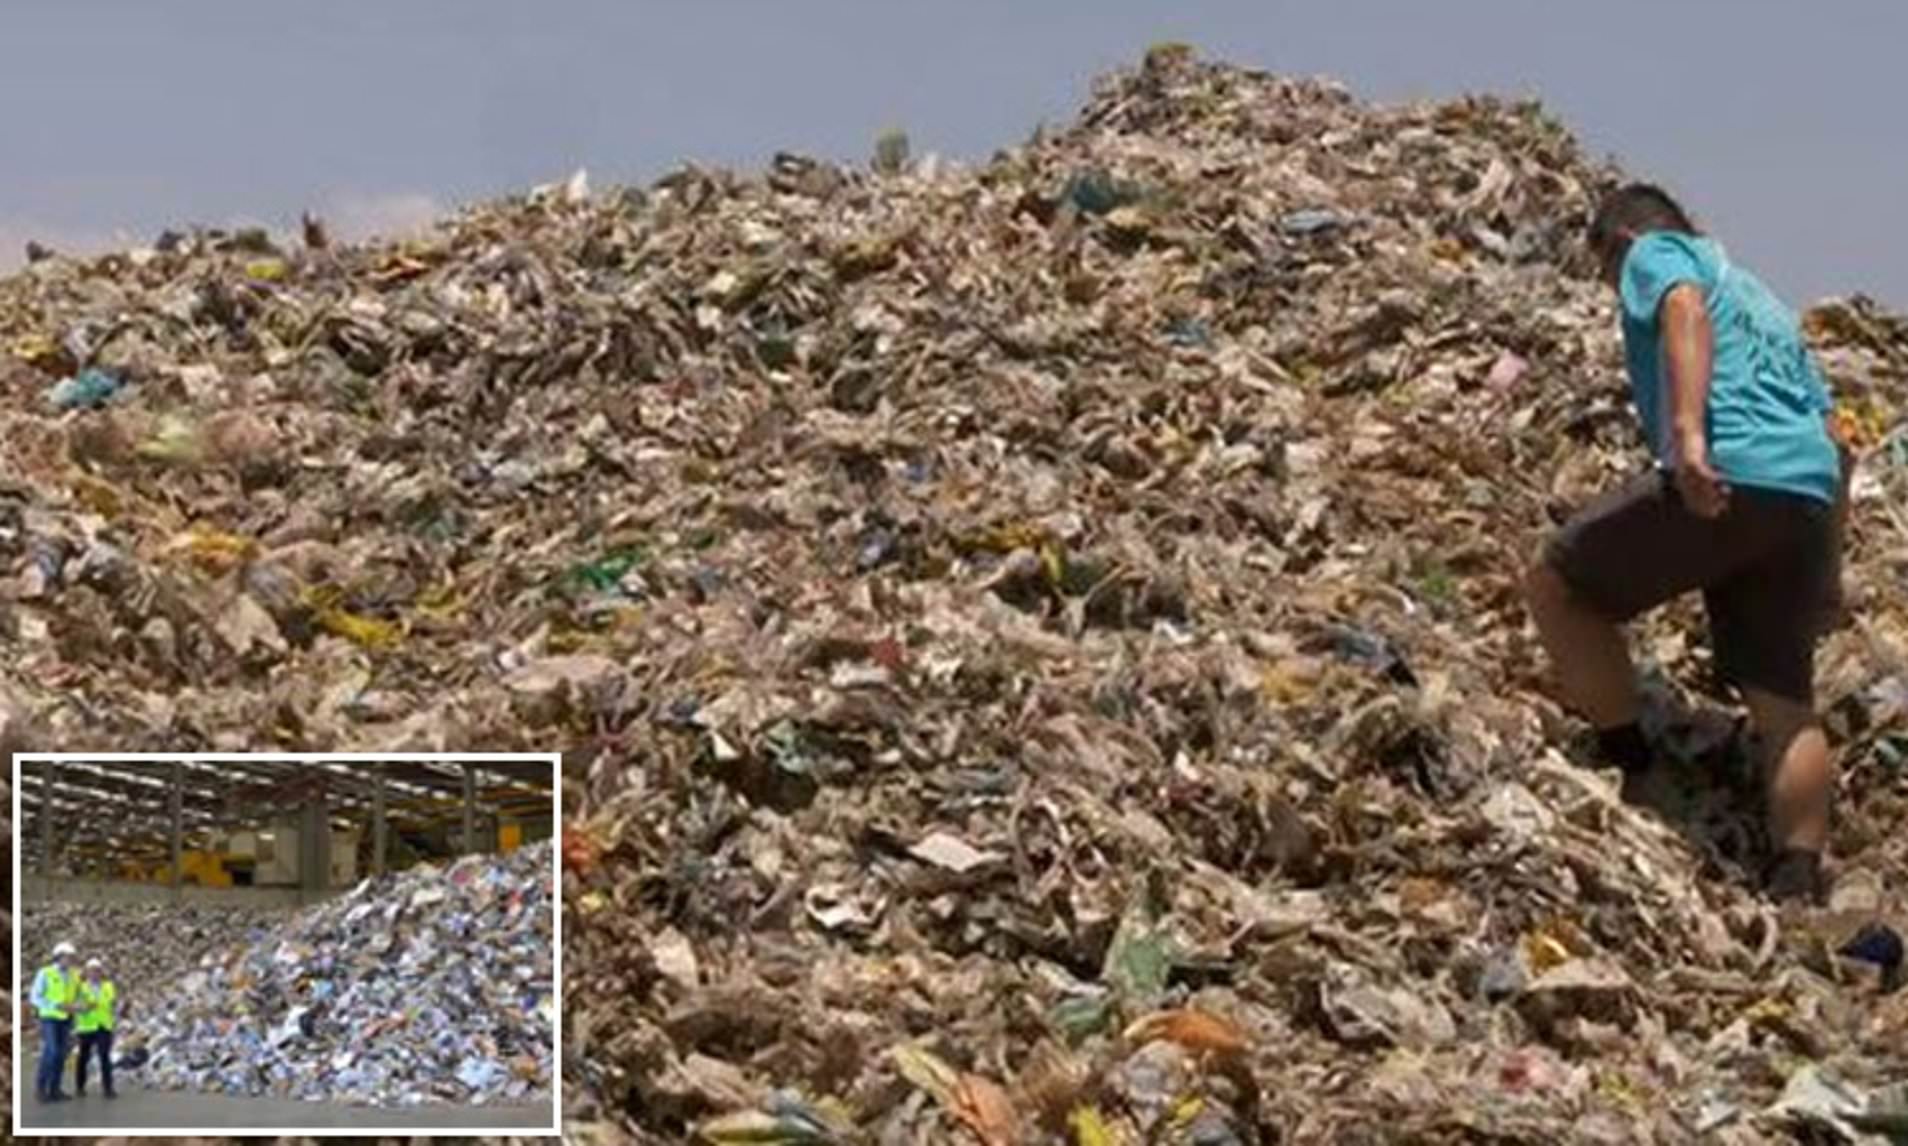 Australia’s recycling lie exposed